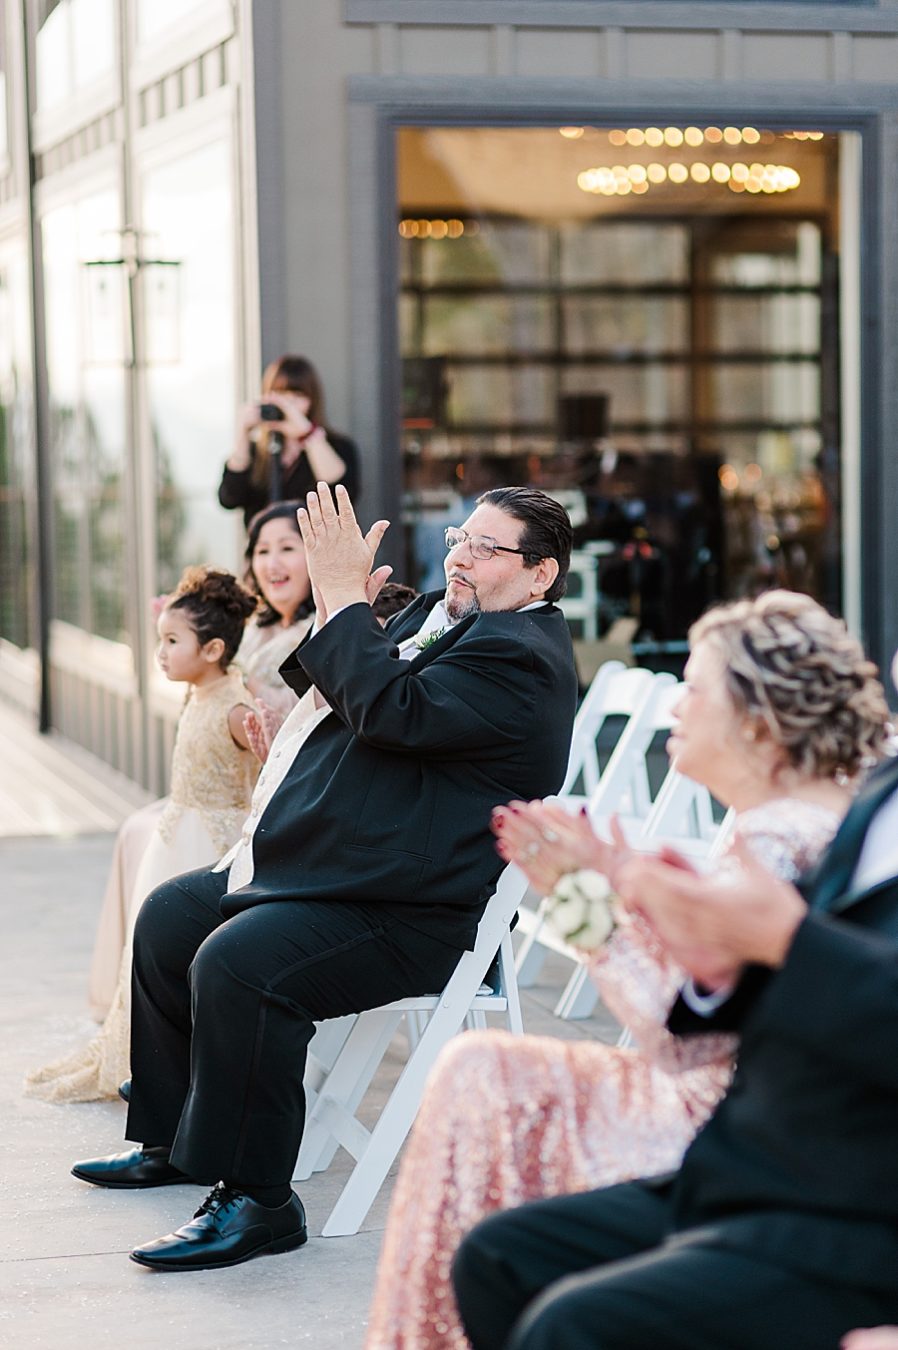 guests clapping for newlyweds